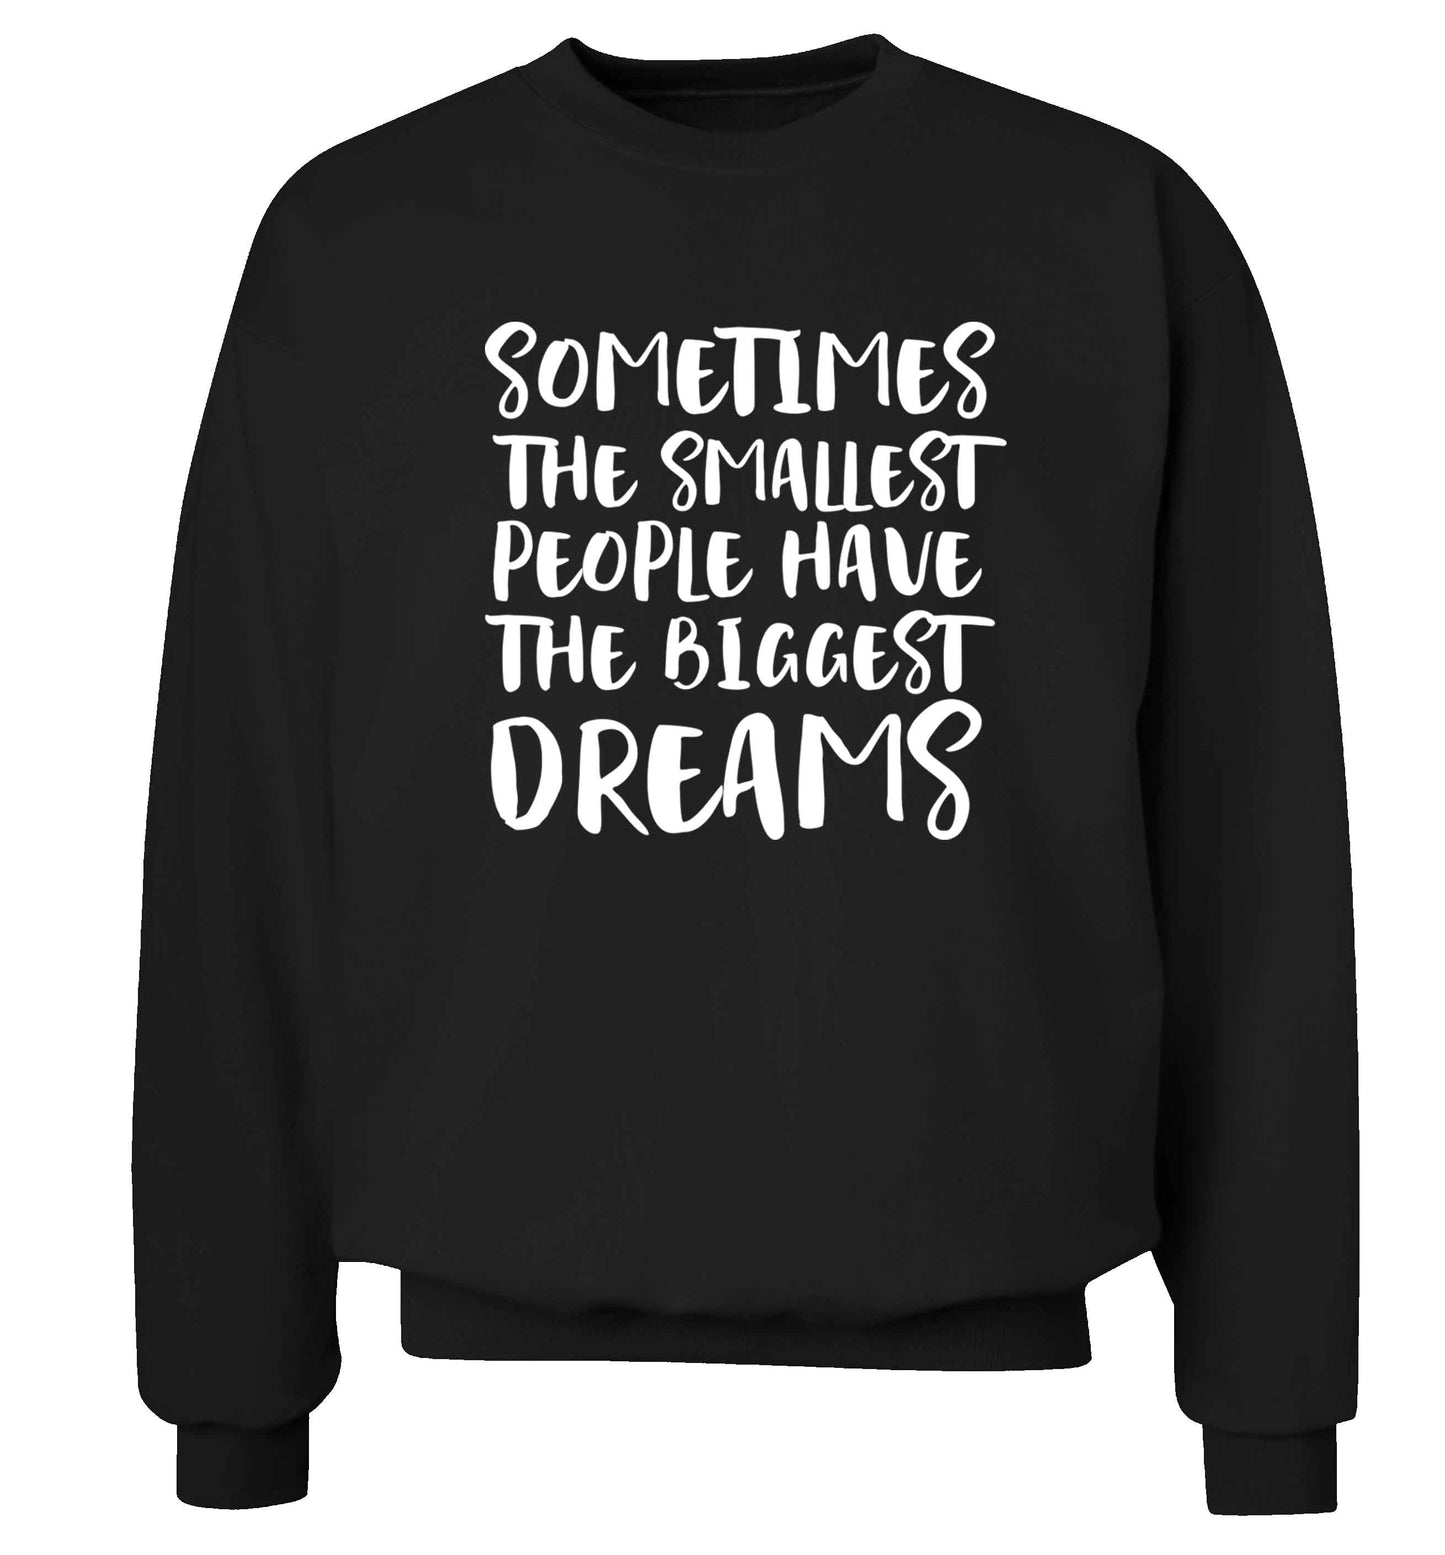 Sometimes the smallest people have the biggest dreams Adult's unisex black Sweater 2XL